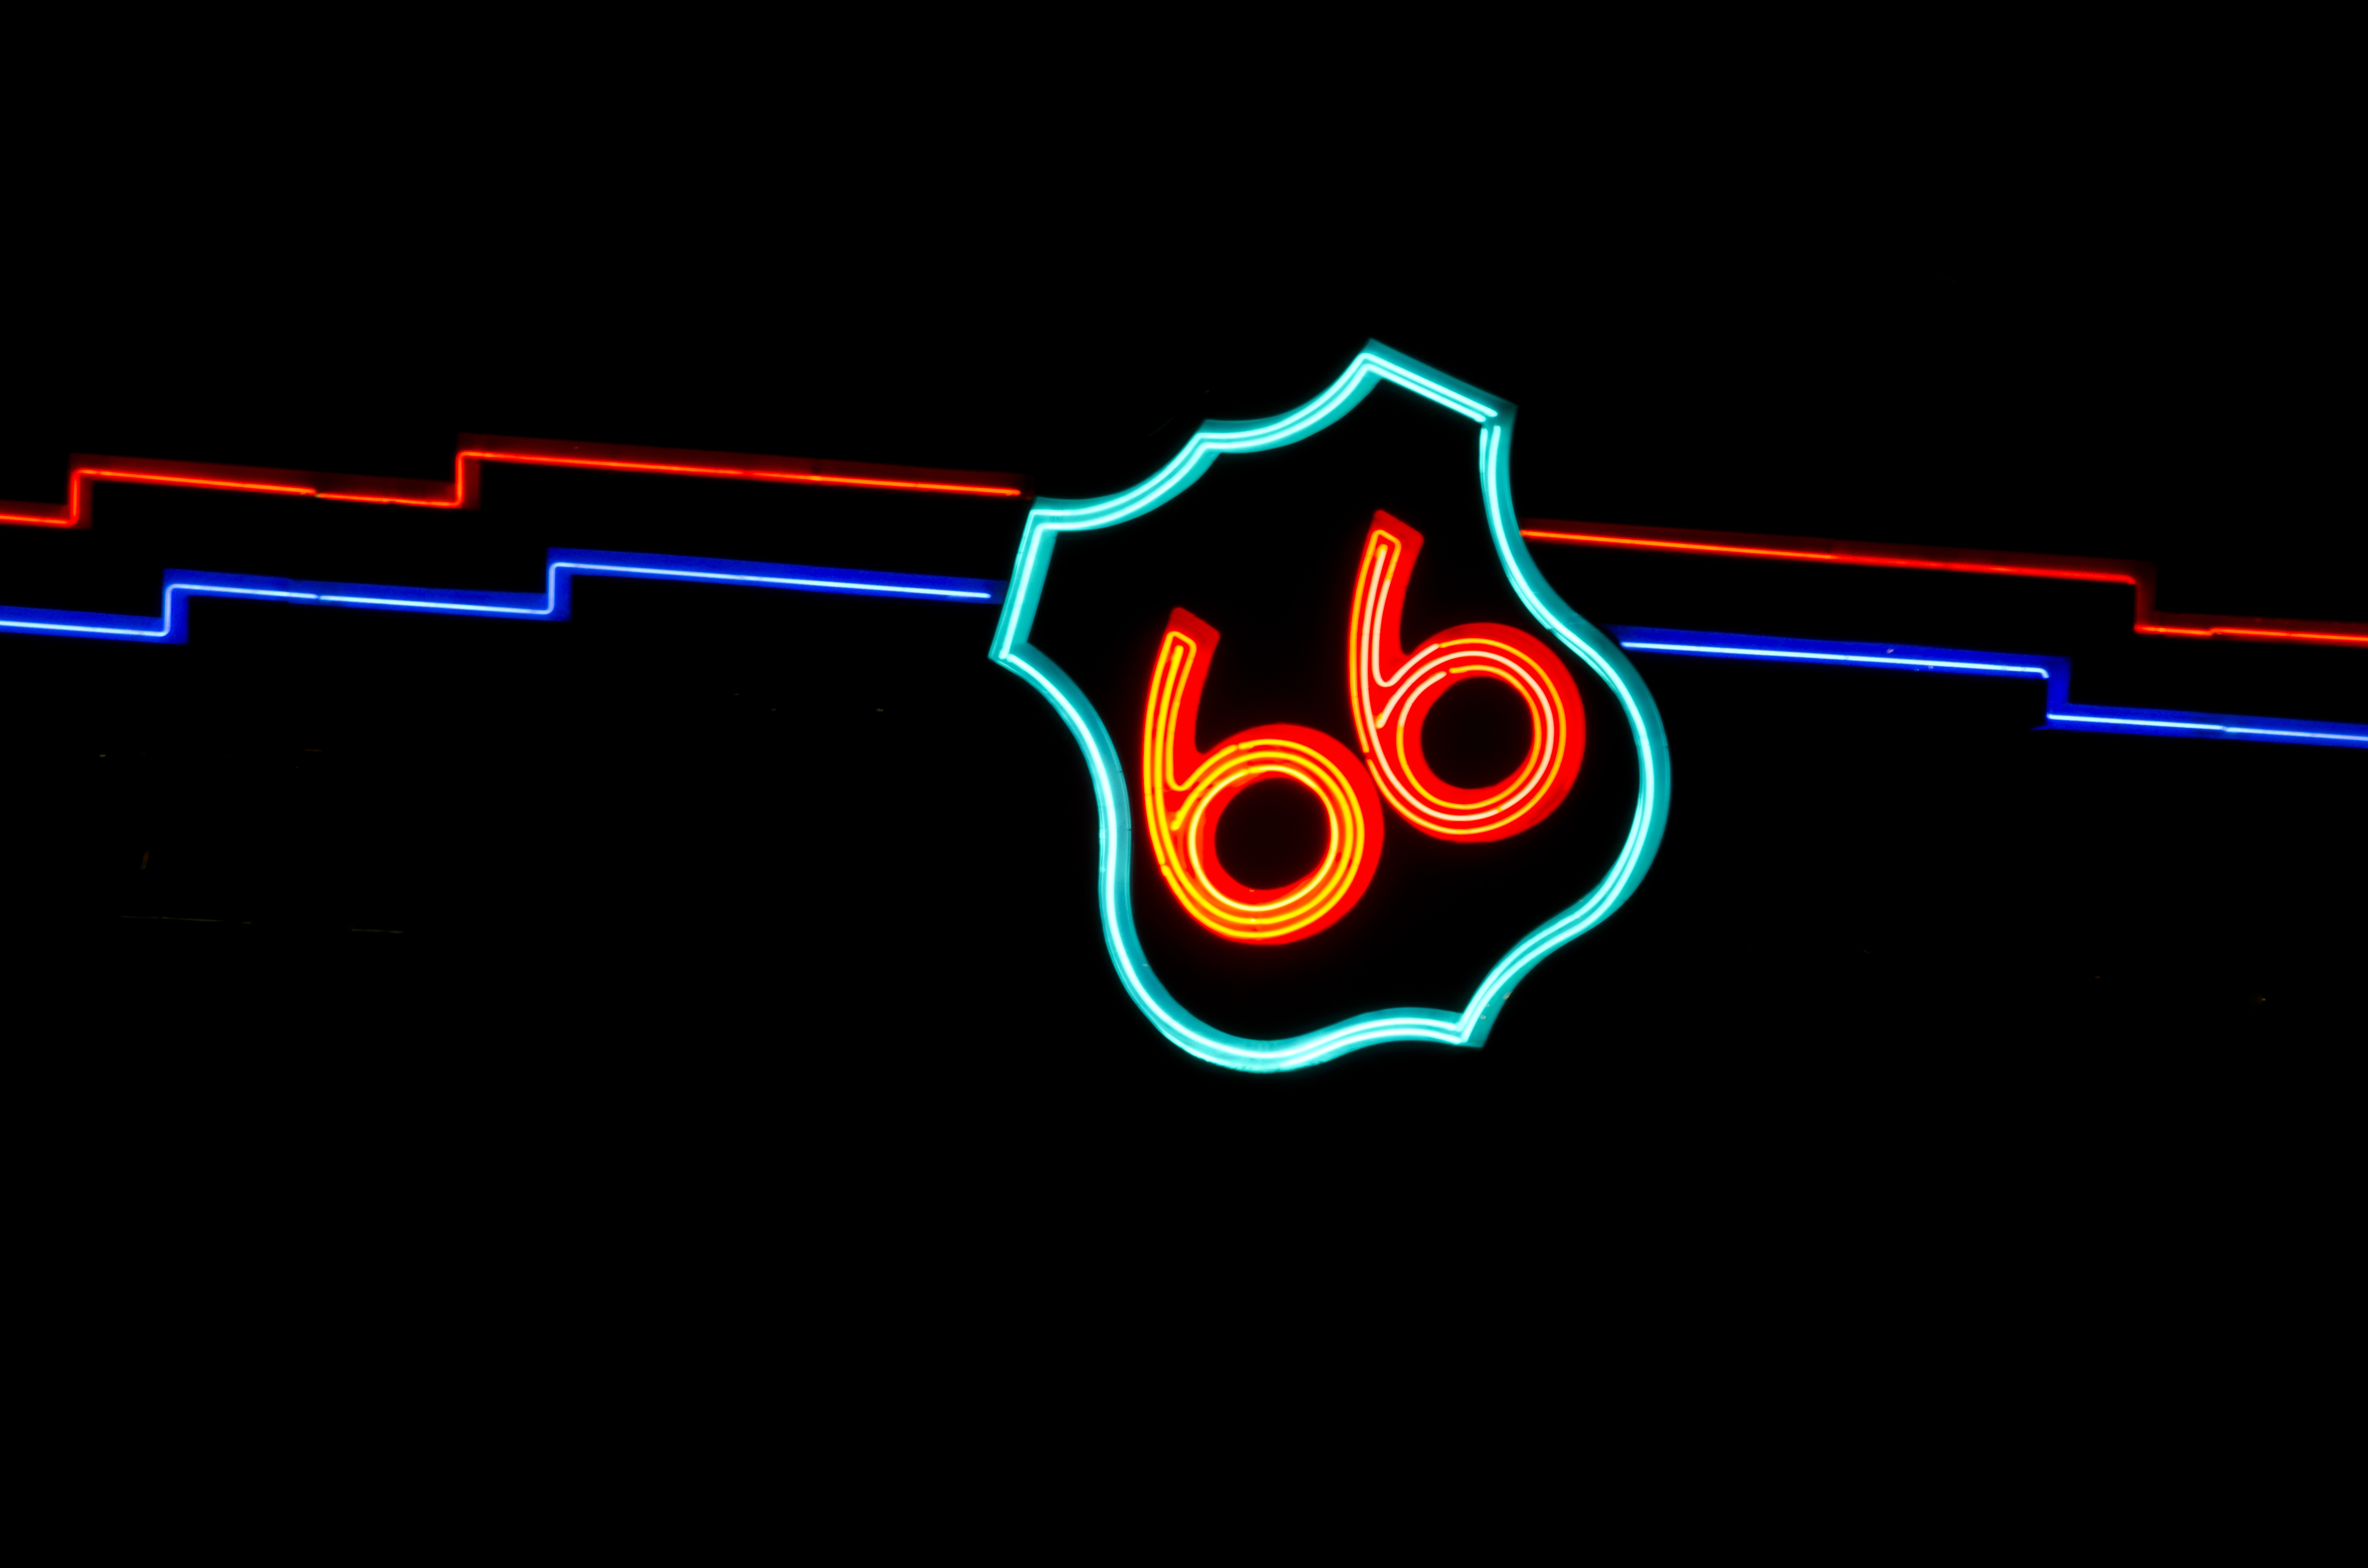 An overpass sign made of neon in the shape of a highway sign with the numbers, 66.